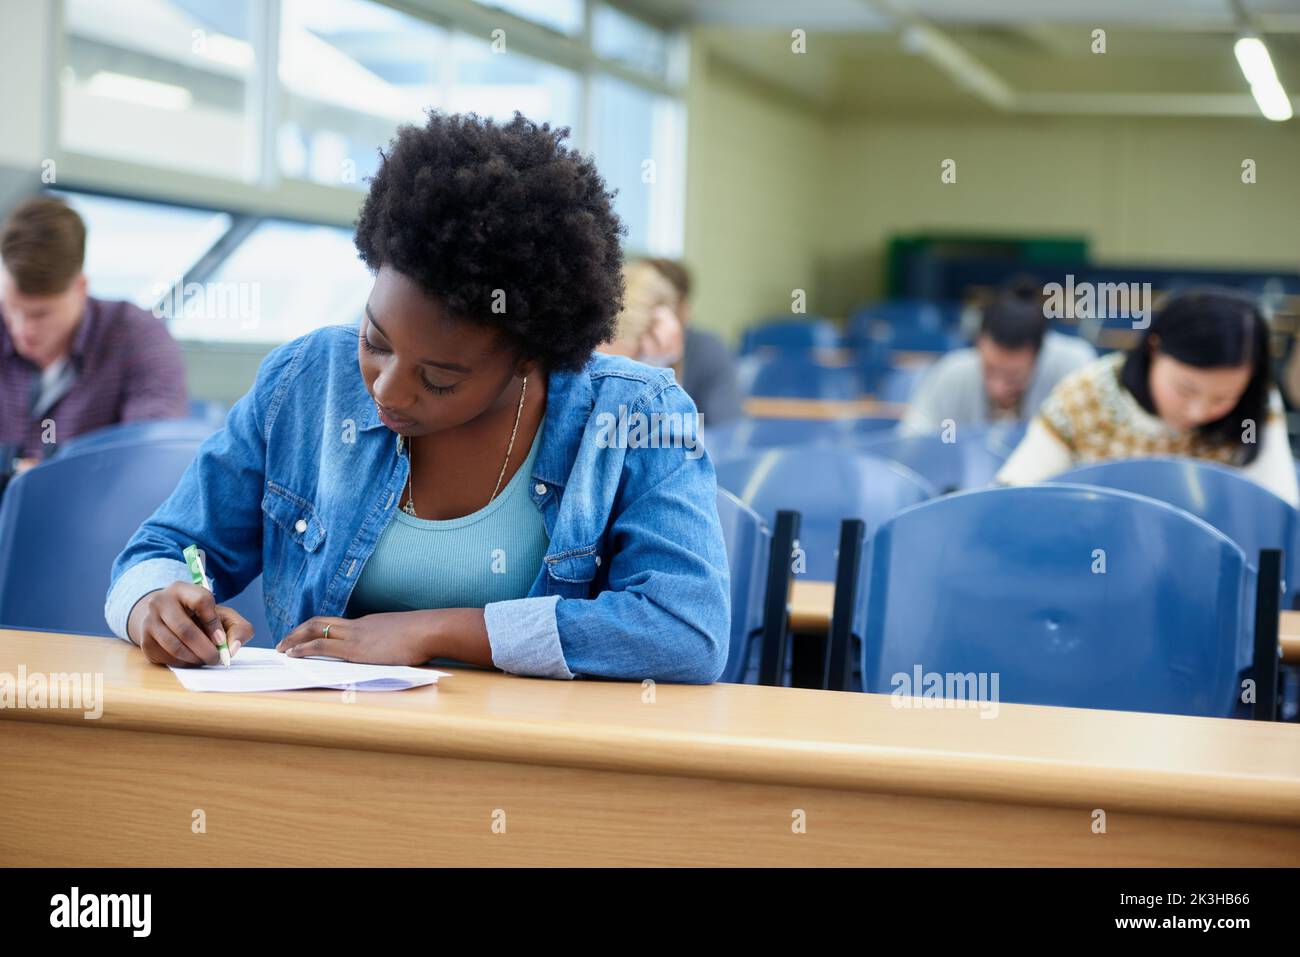 Glad I crammed last night...an attractive college student studying in a lecture hall. Stock Photo